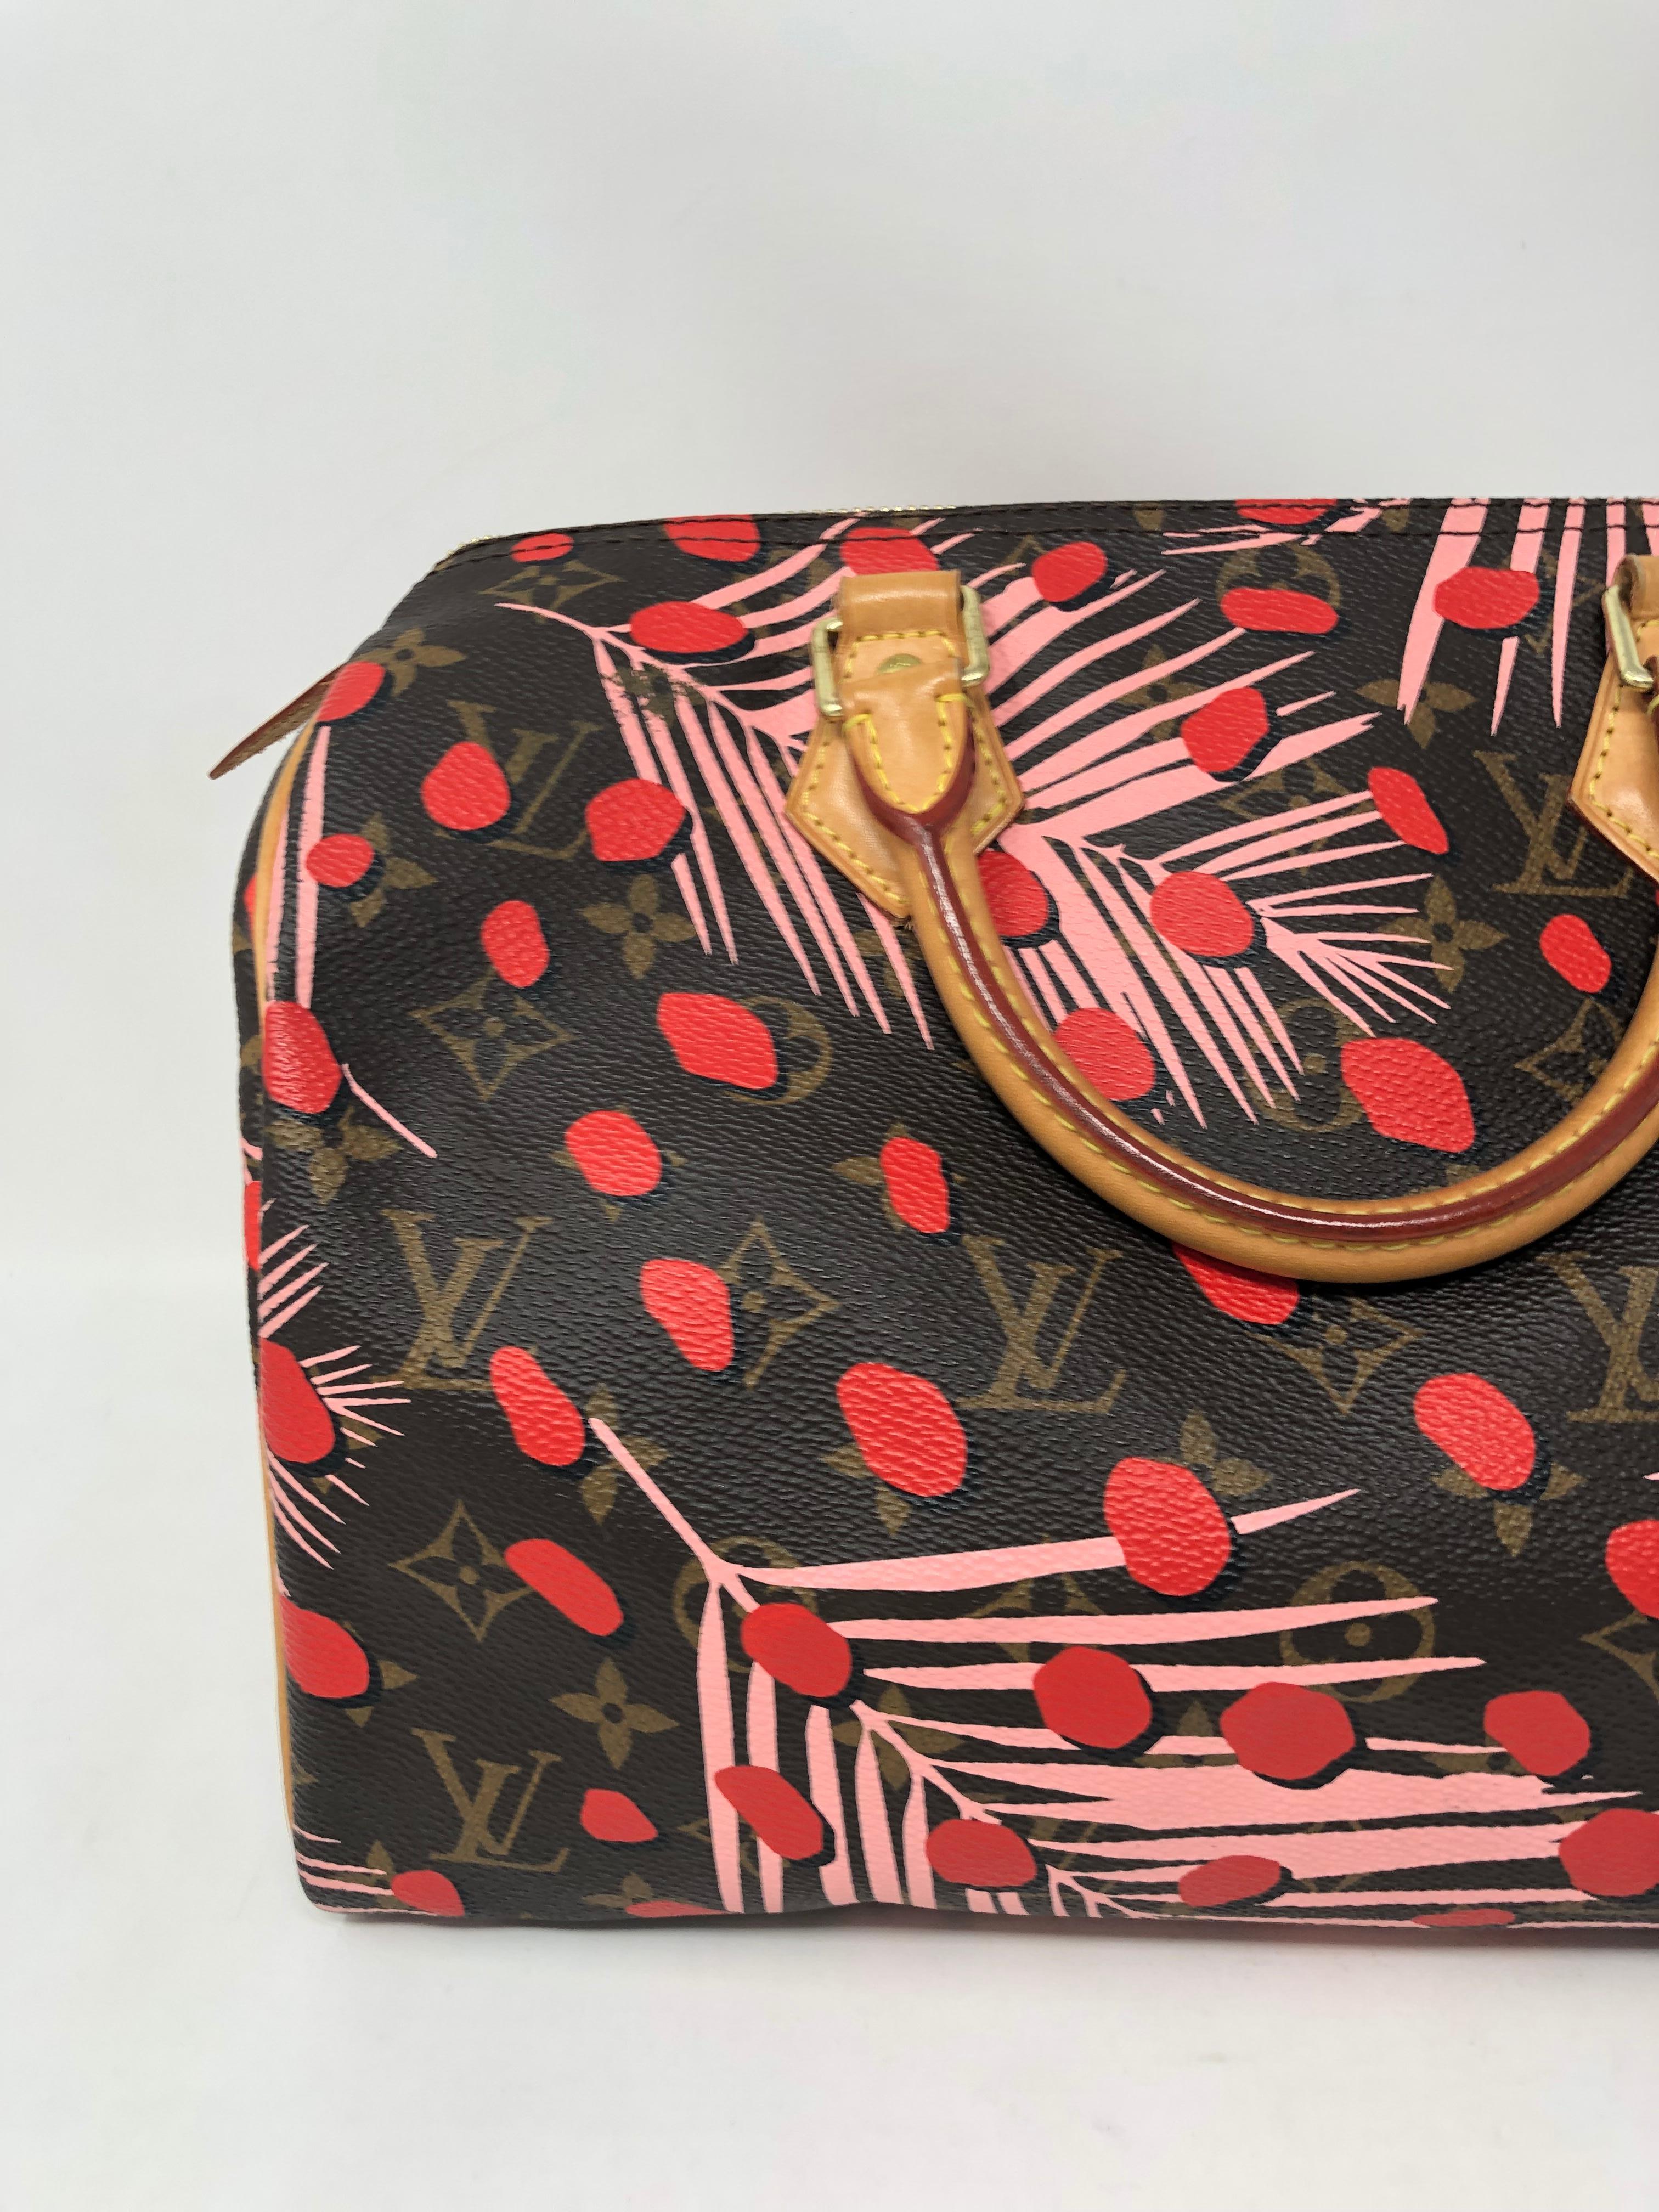 Louis Vuitton limited edition Sugar Pink Poppy Jungle Speedy 30 in monogram. Rare collector's piece in good condition. Vibrant jungle print layered with the classic monogram canvas. From 2016. Guaranteed authentic. 